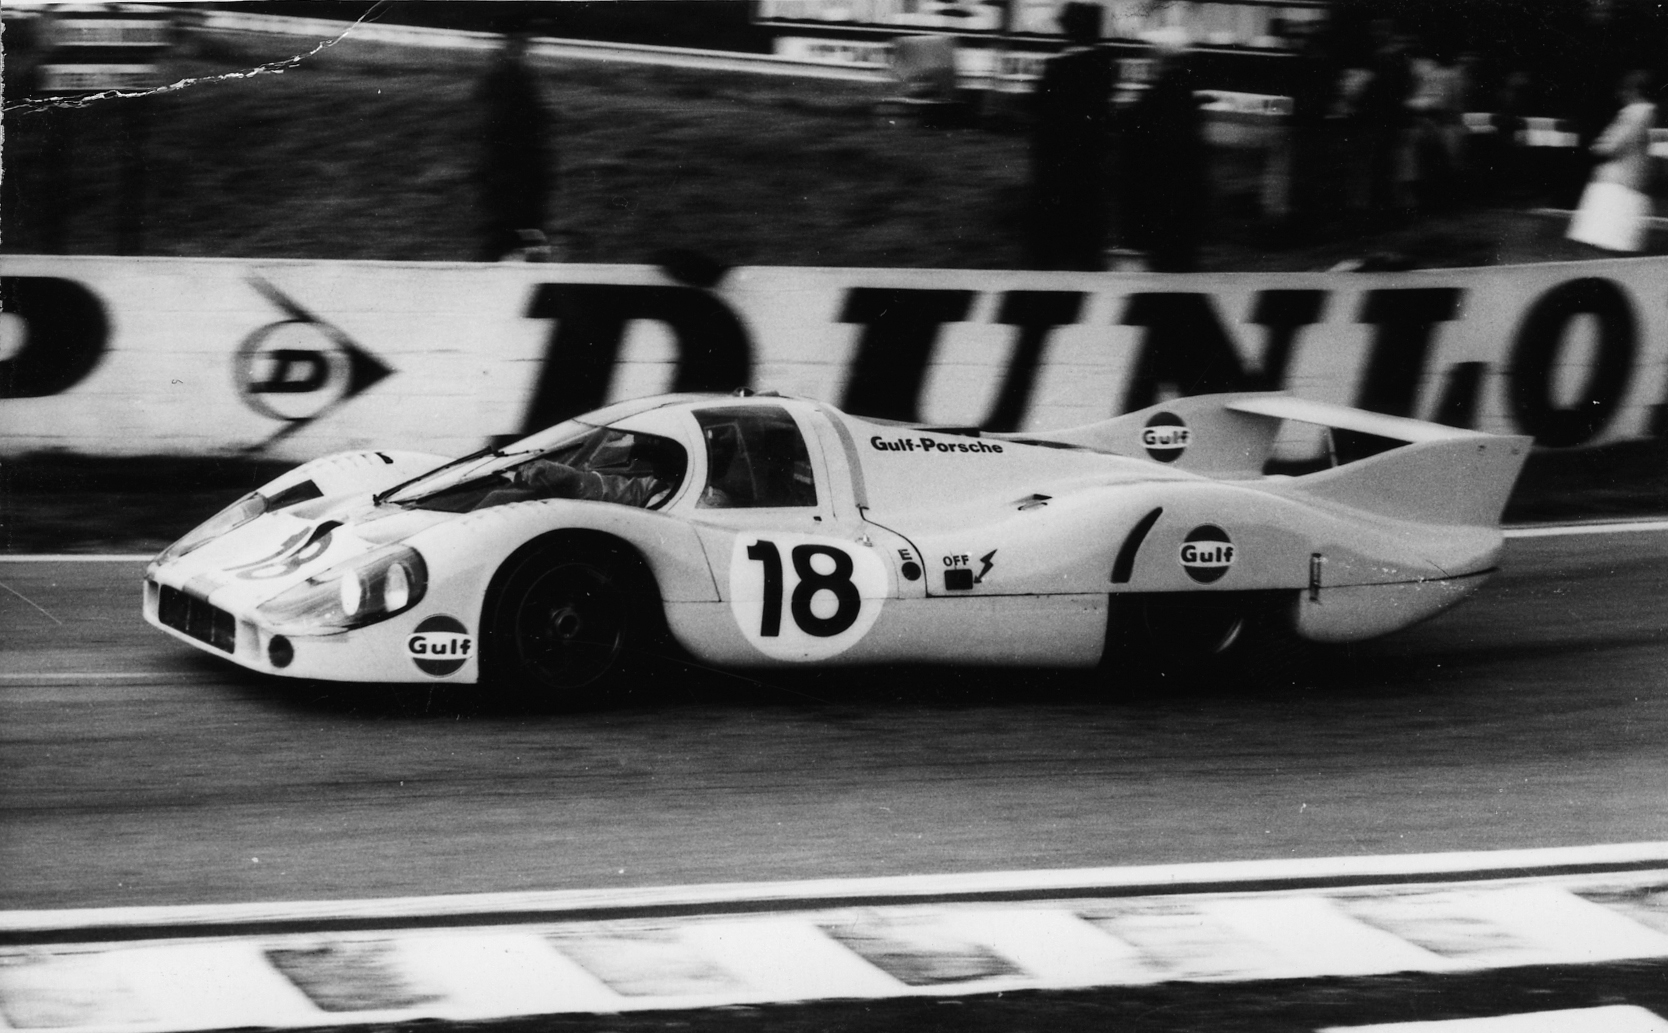 The Porsche 917 LH achieved quicker top speed thanks to its specially elongated body: the perfect recipe for setting a record.